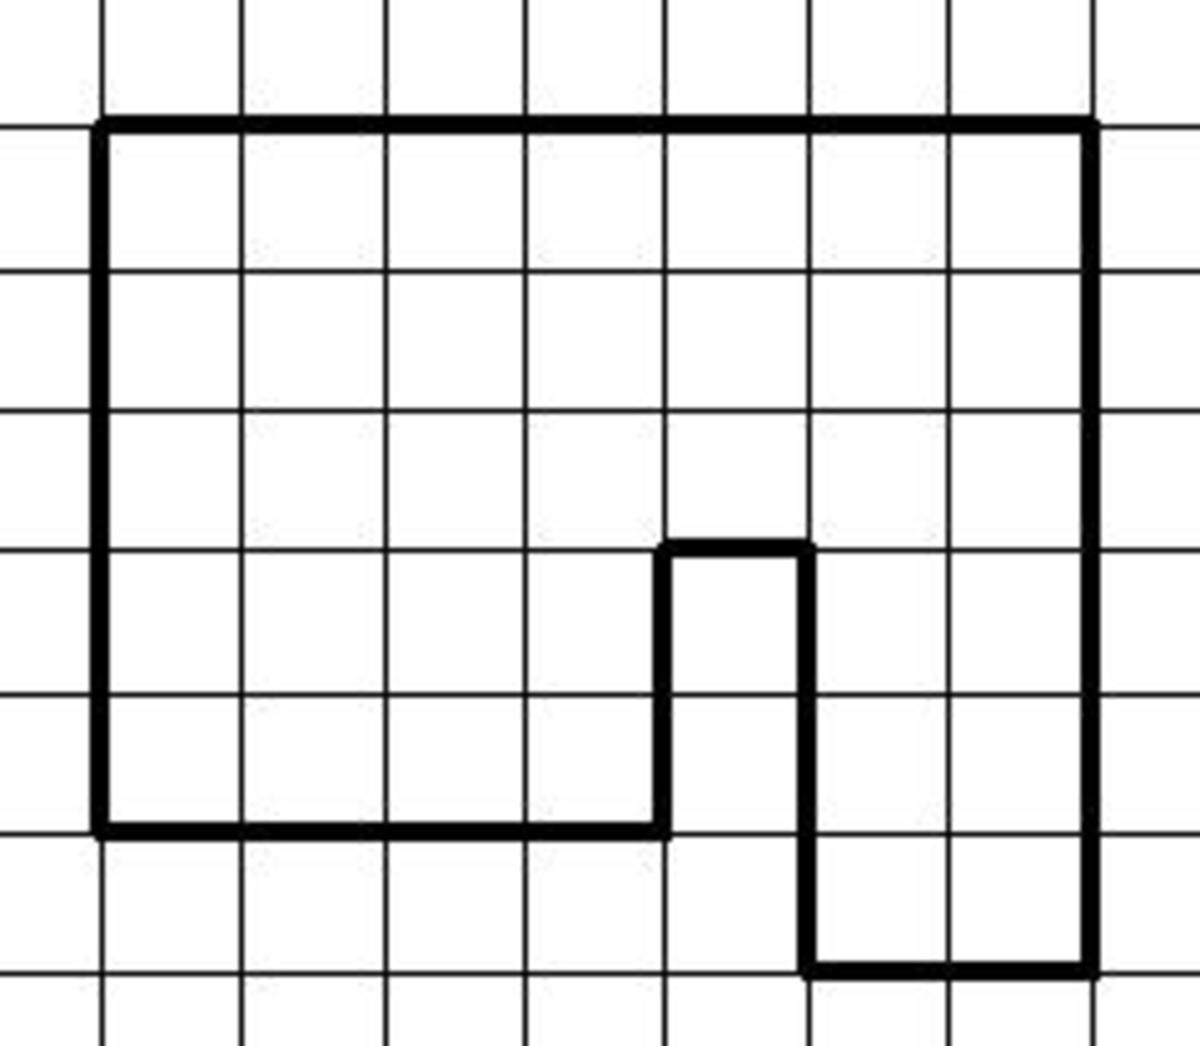 how-to-find-the-area-of-shape-by-counting-the-squares-year-6-maths